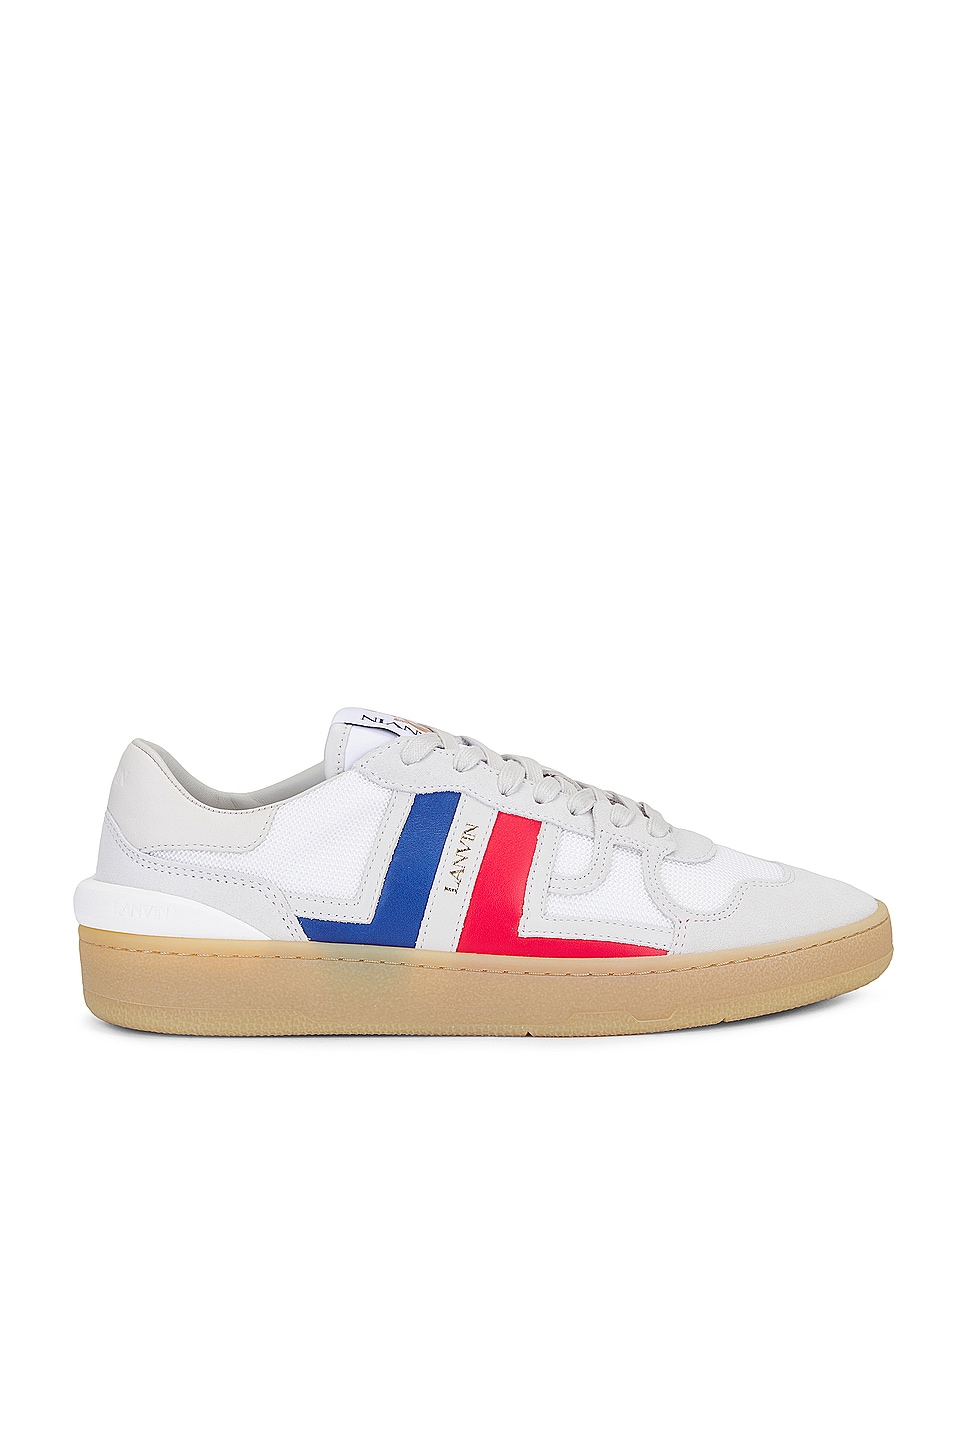 Image 1 of Lanvin Clay Low Top Sneakers in White & Black